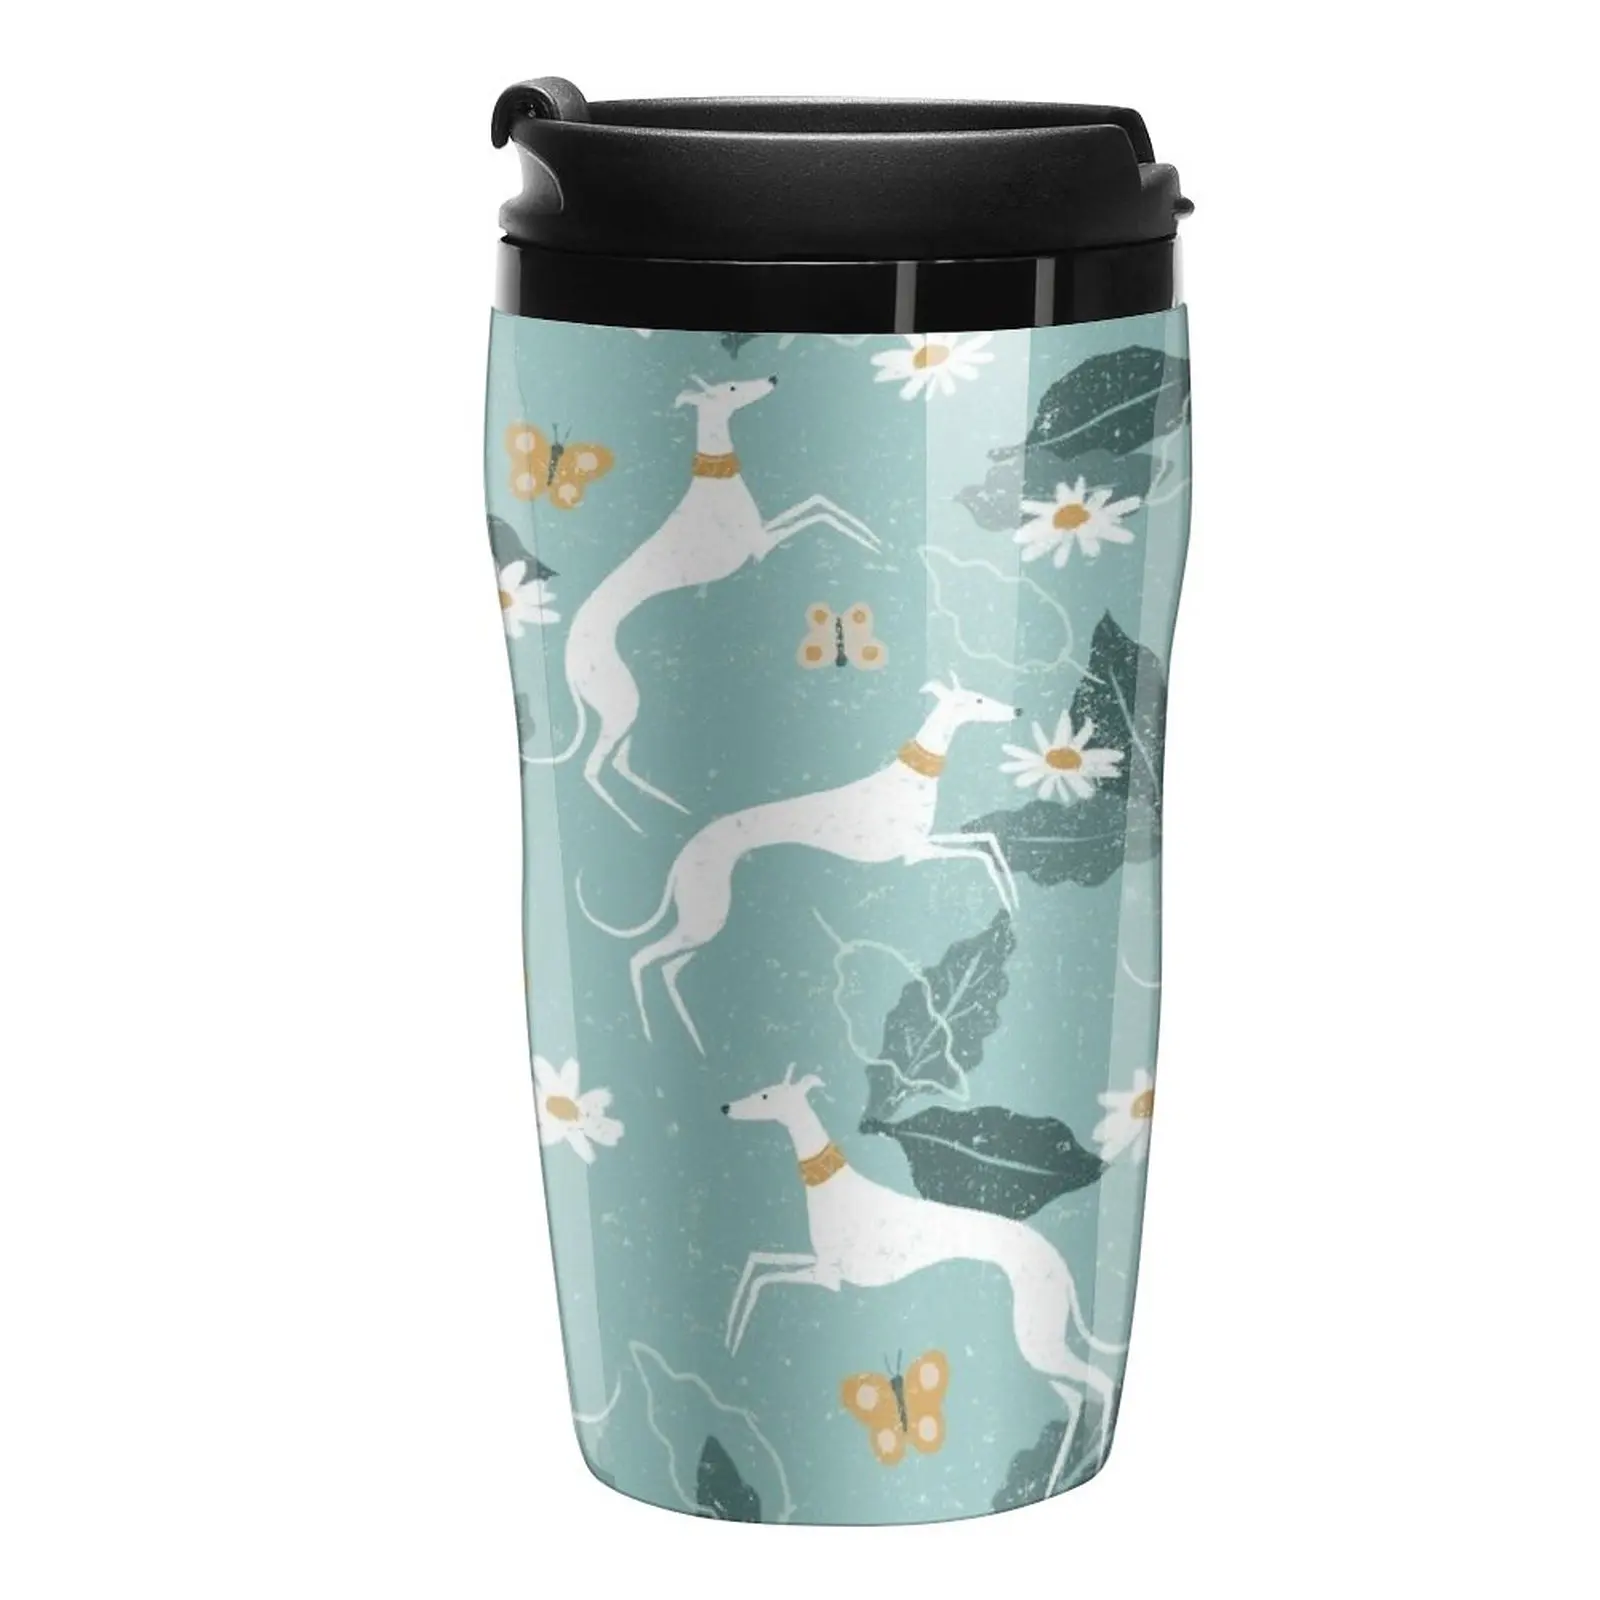 

New Greyhound and Butterfly Travel Coffee Mug Espresso Coffee Cups Cup Coffe Beautiful Tea Cups Latte Cup